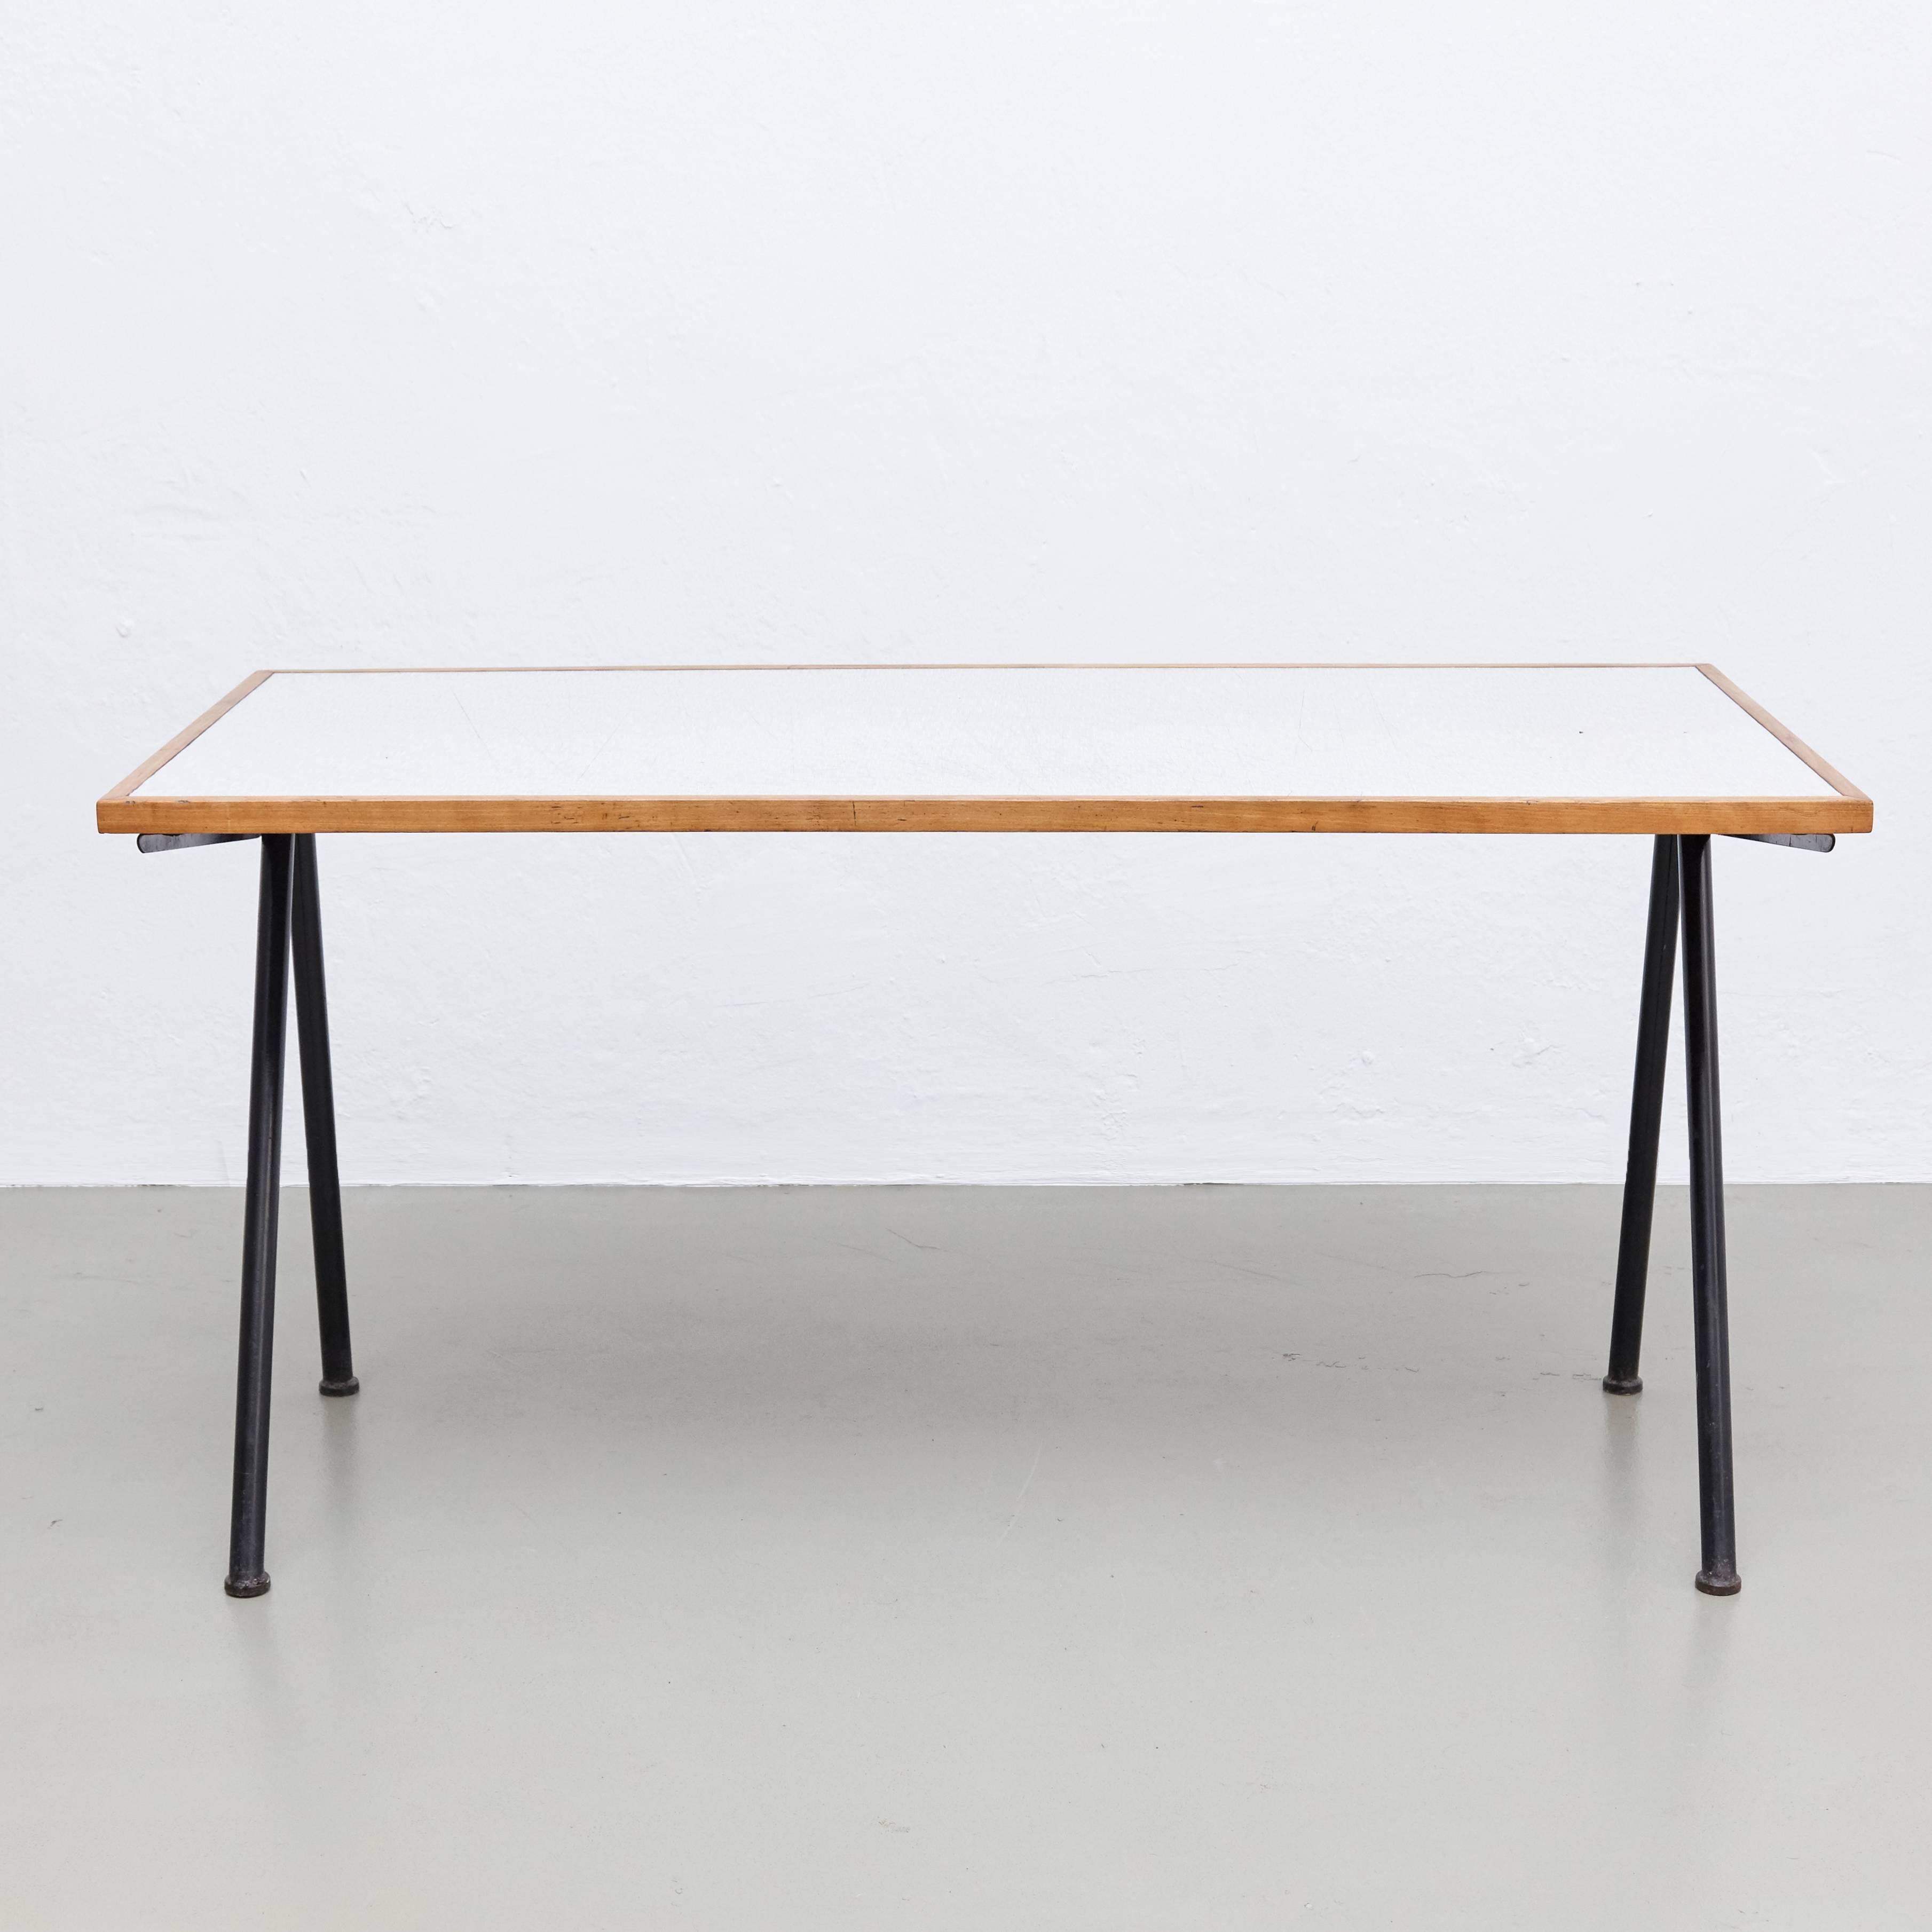 Compass desk designed by Jean Prouvé in 1953, produced in 1955 for the internationale Universite, manufactured by Ateliers Jean Prouvé.

In good original condition, with minor wear consistent with age and use, preserving a beautiful